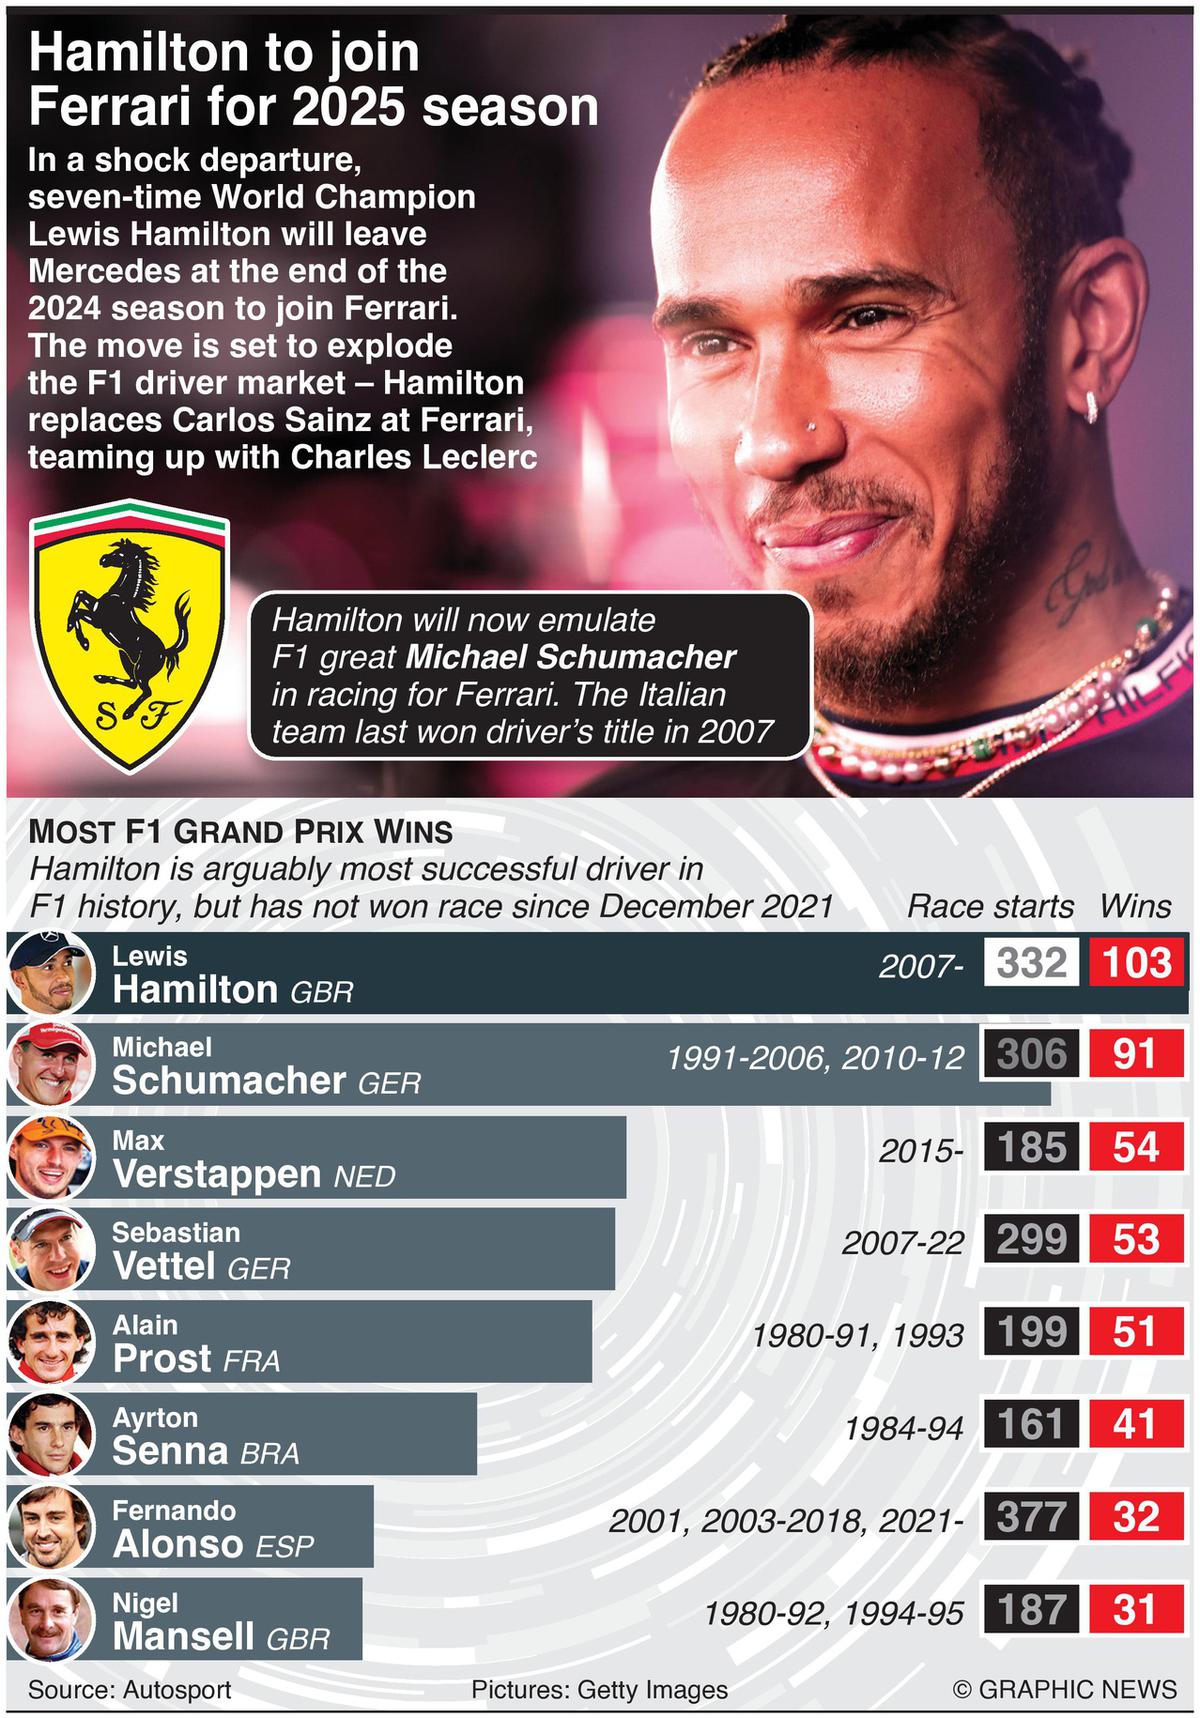 The graphic shows drivers with highest number of Formula One race victories.